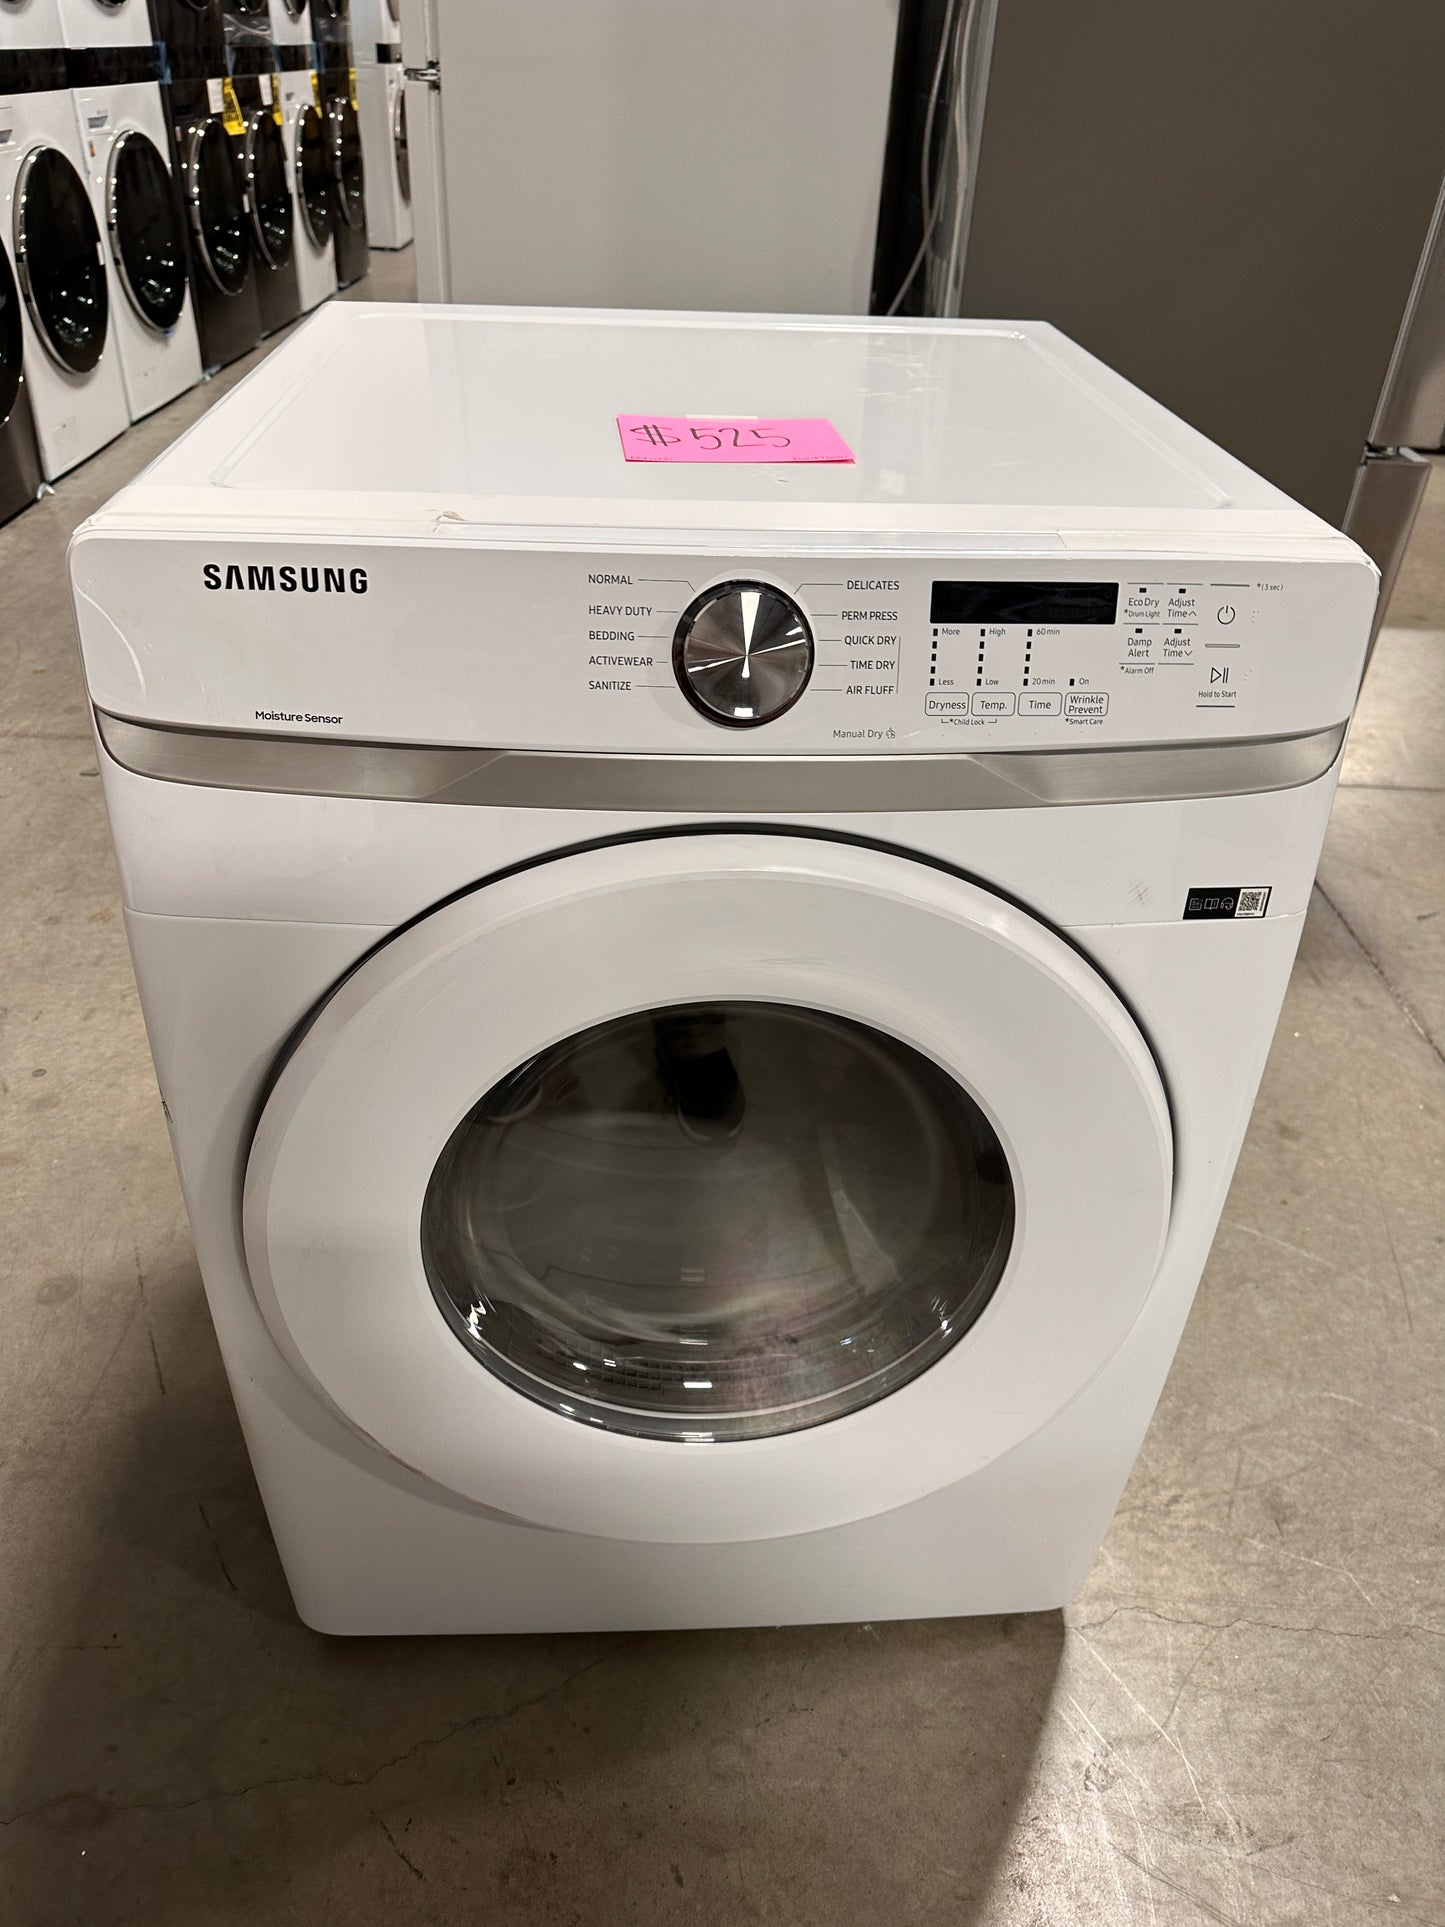 SAMSUNG STACKABLE ELECTRIC DRYER - DRY12281 DVE45T6000W